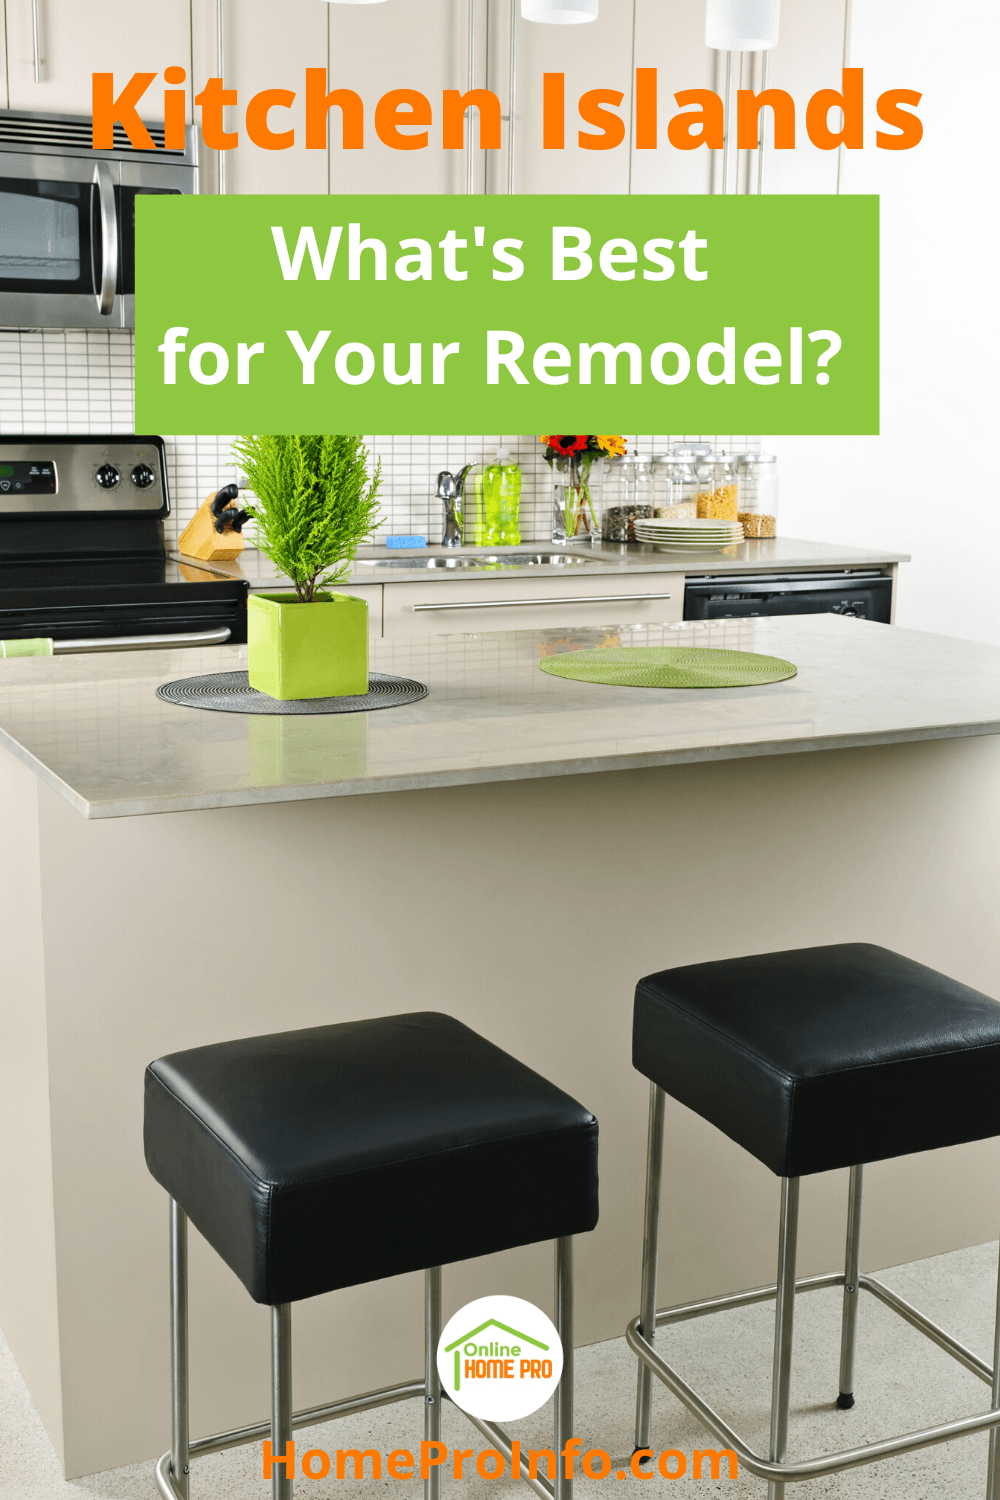 kitchen islands and remodeling